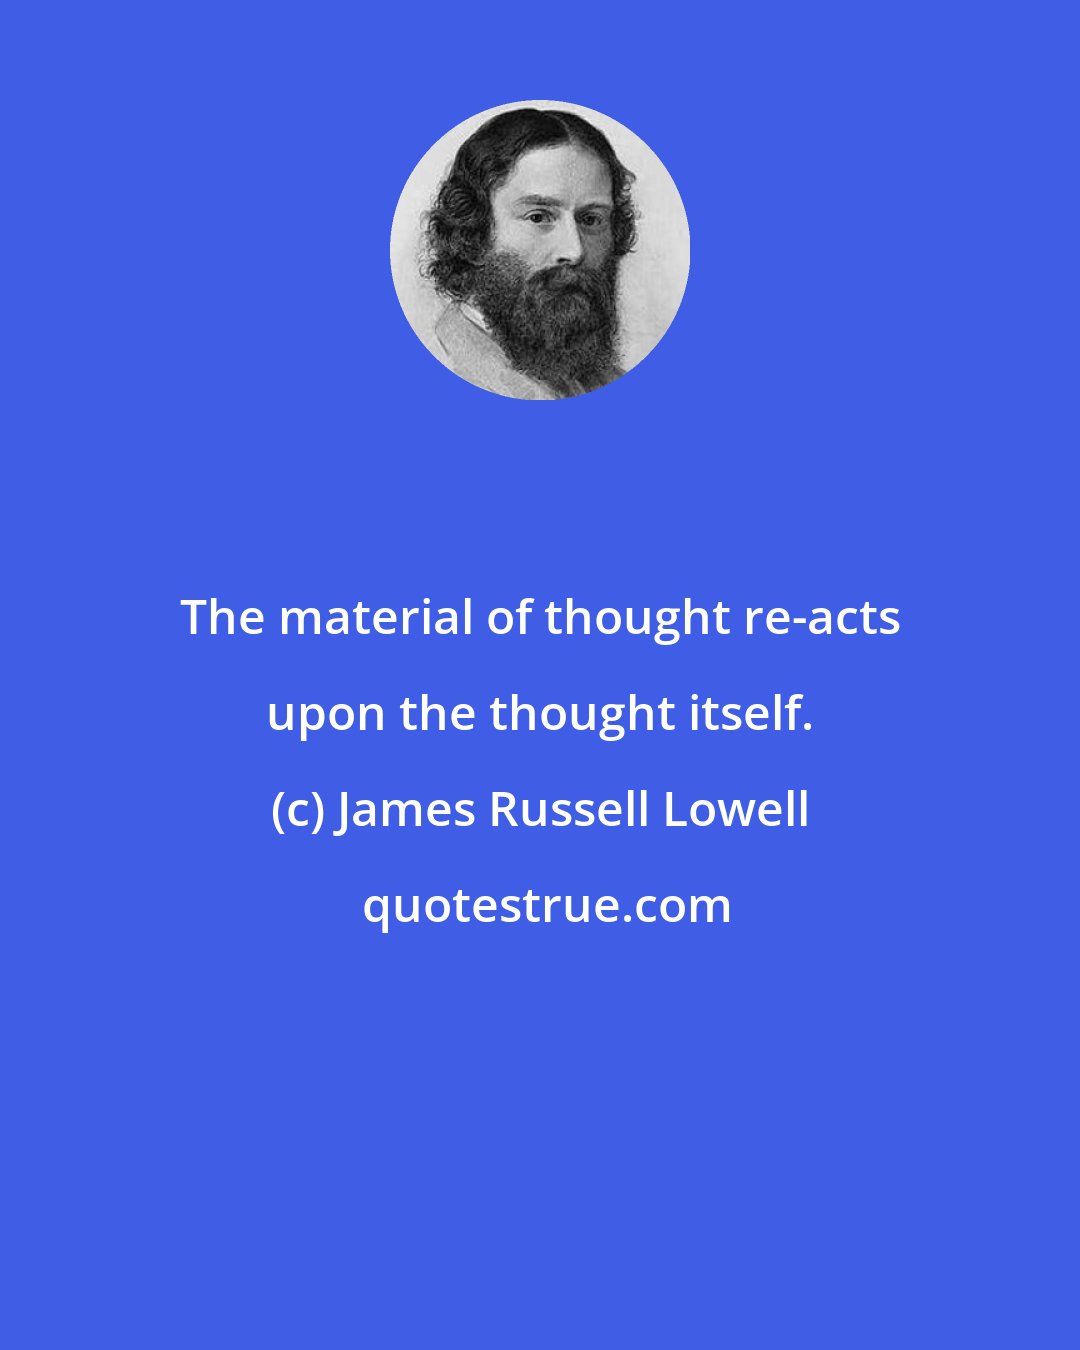 James Russell Lowell: The material of thought re-acts upon the thought itself.